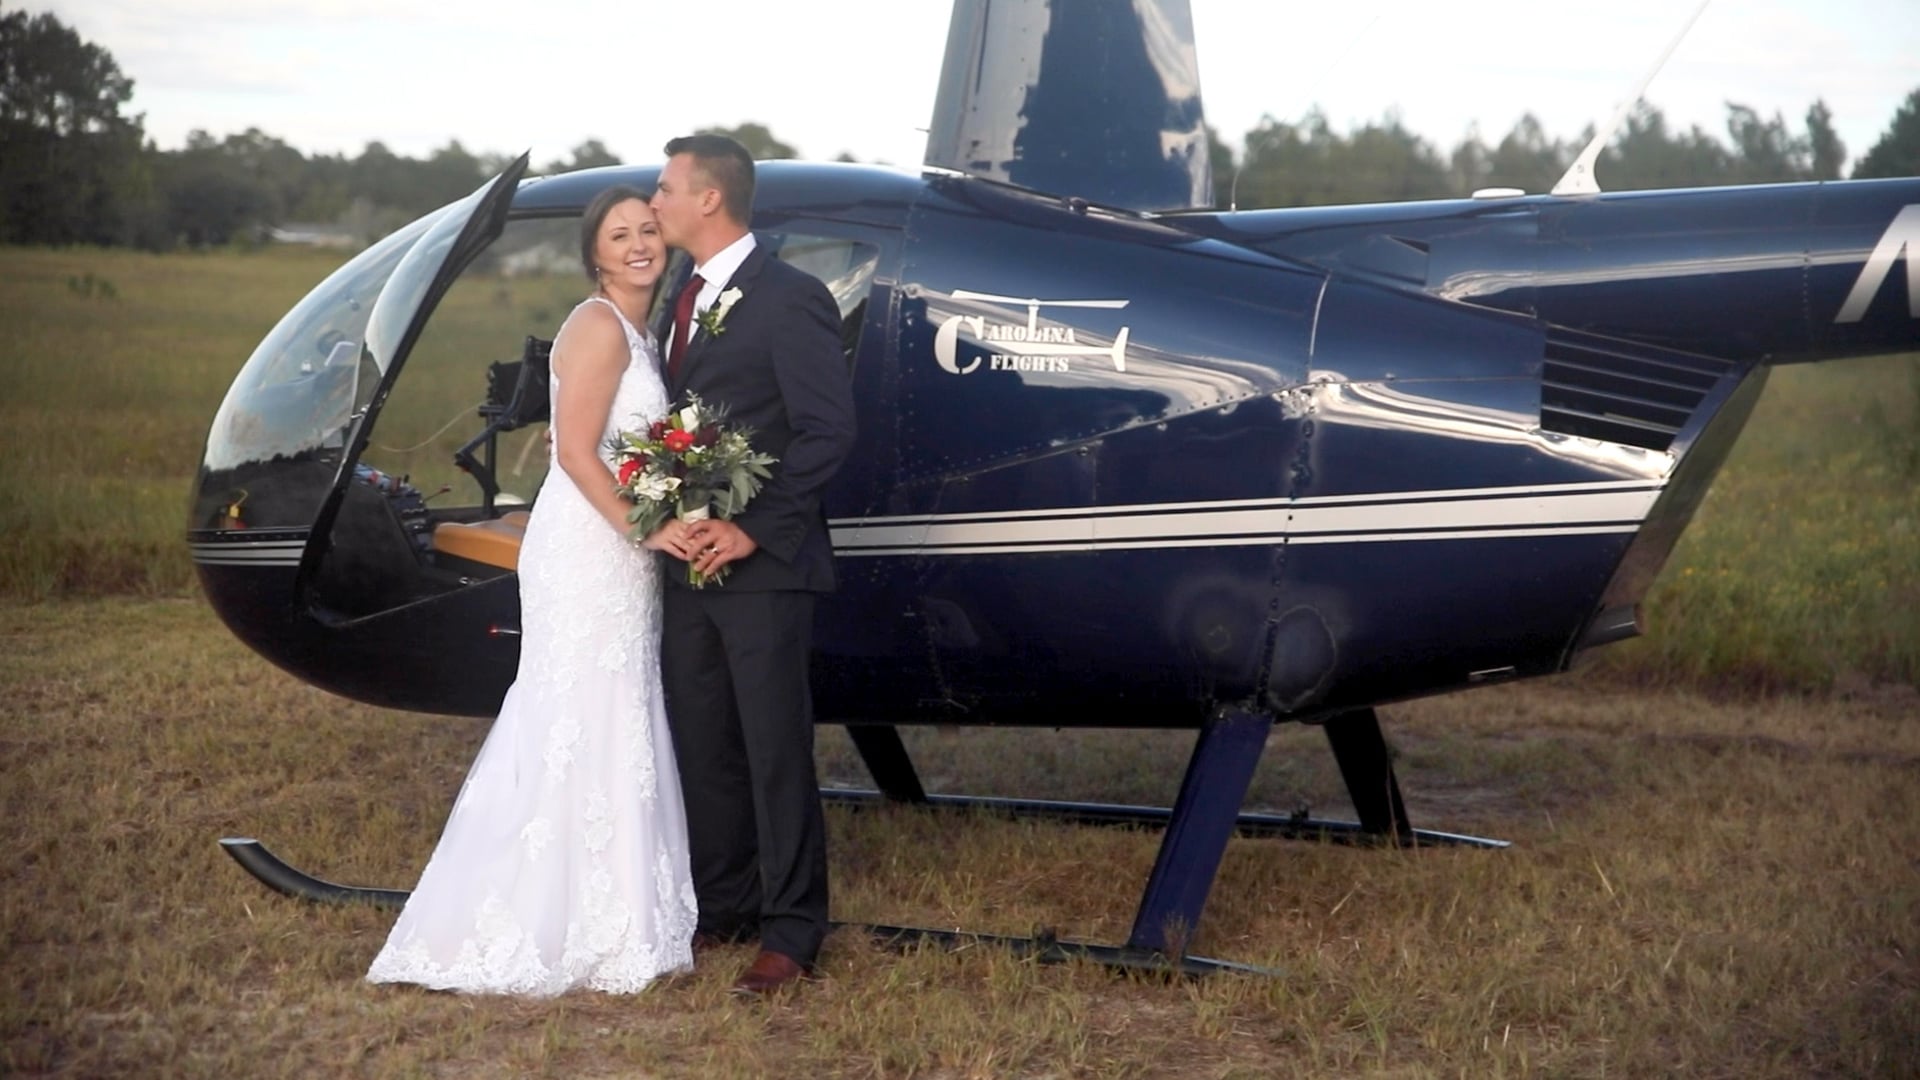 Caitlin and Avery blow us away at their wedding!